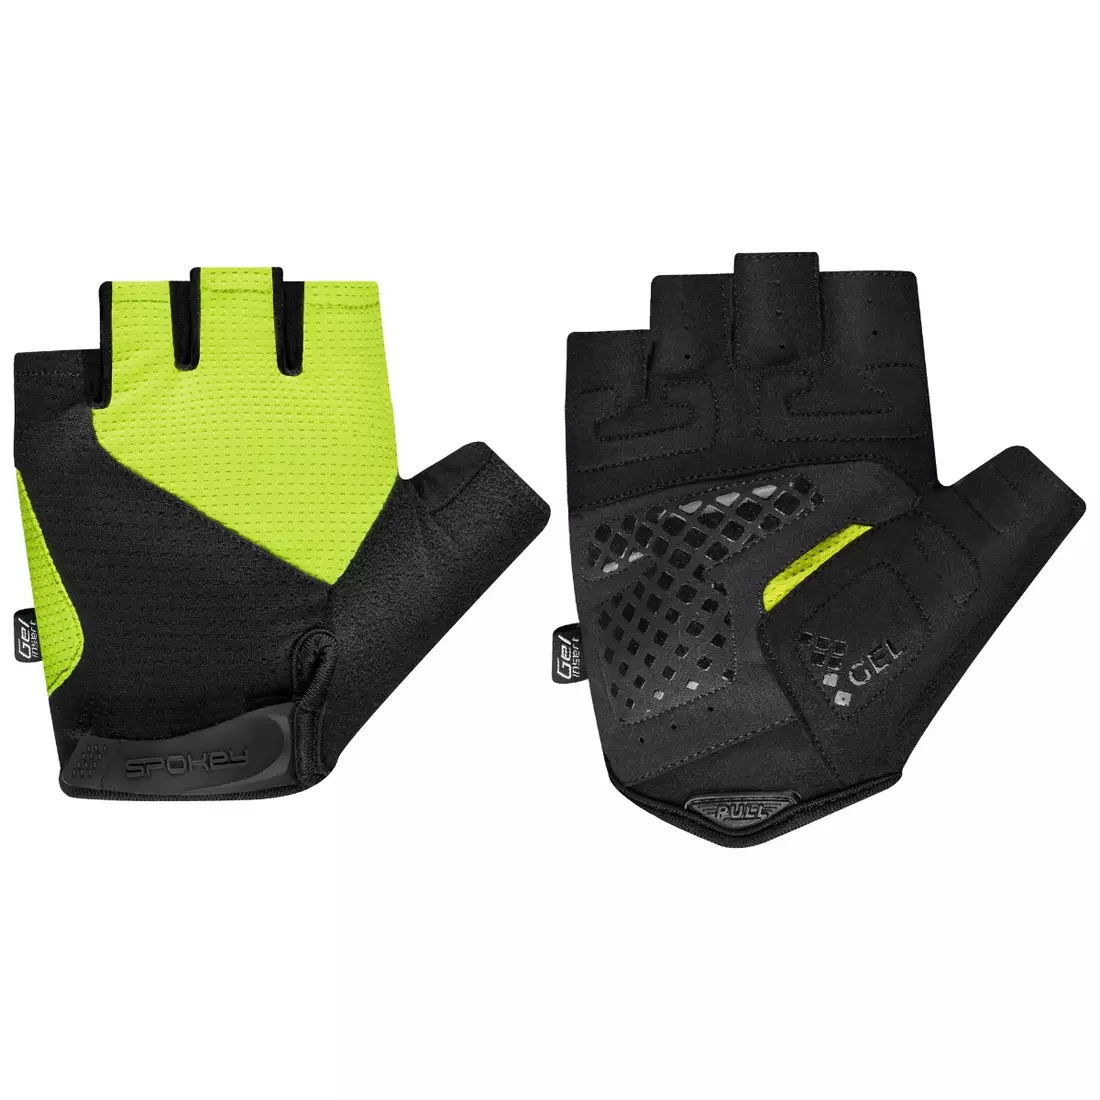 SPOKEY EXPERT men's cycling gloves yellow and black